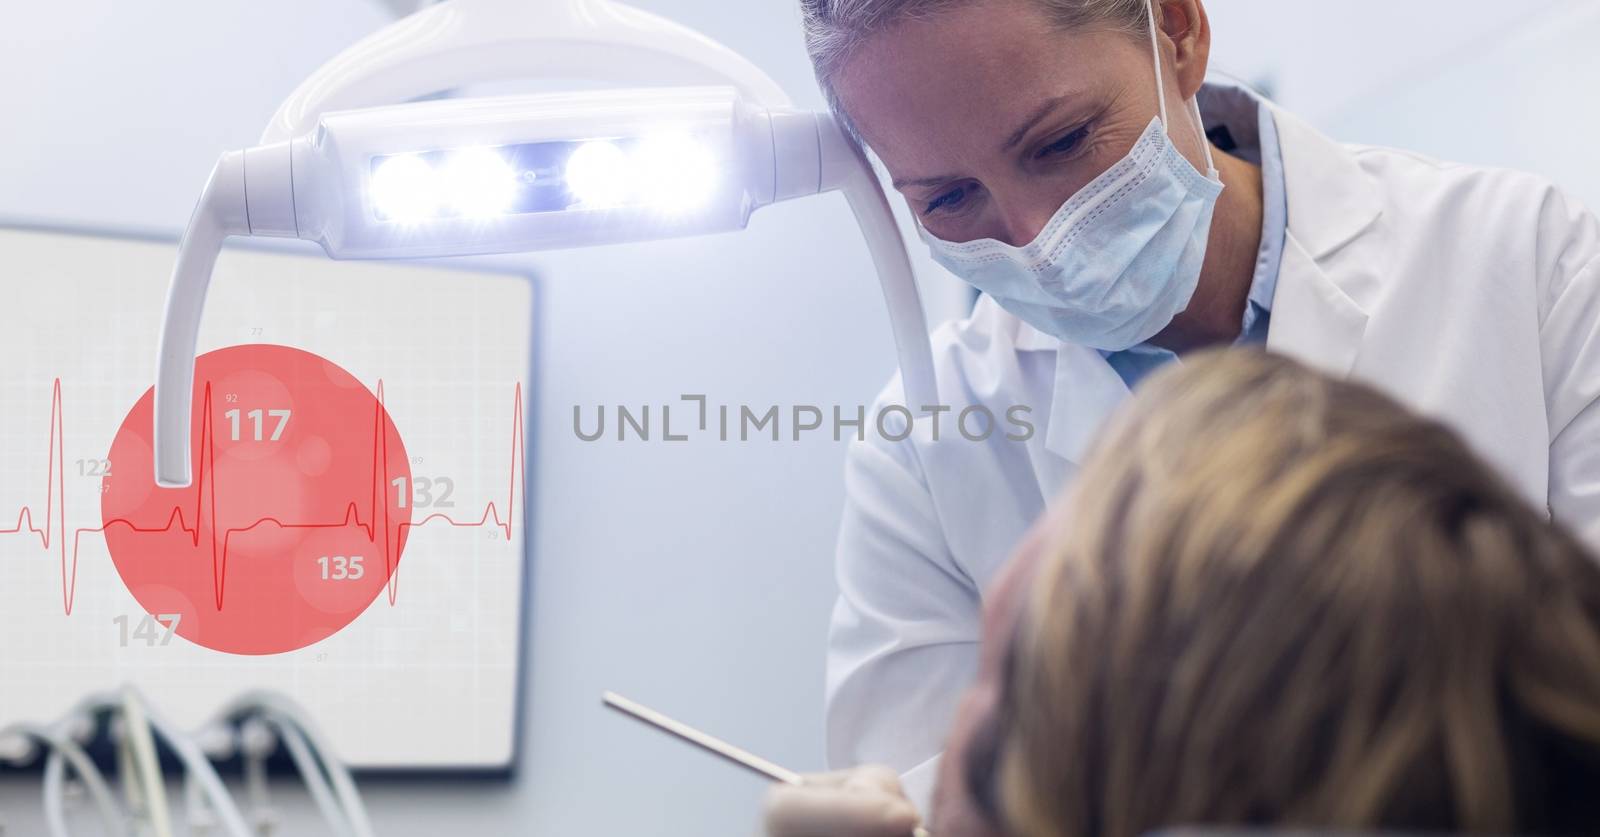 Female dentist checking patient teeth in hospital